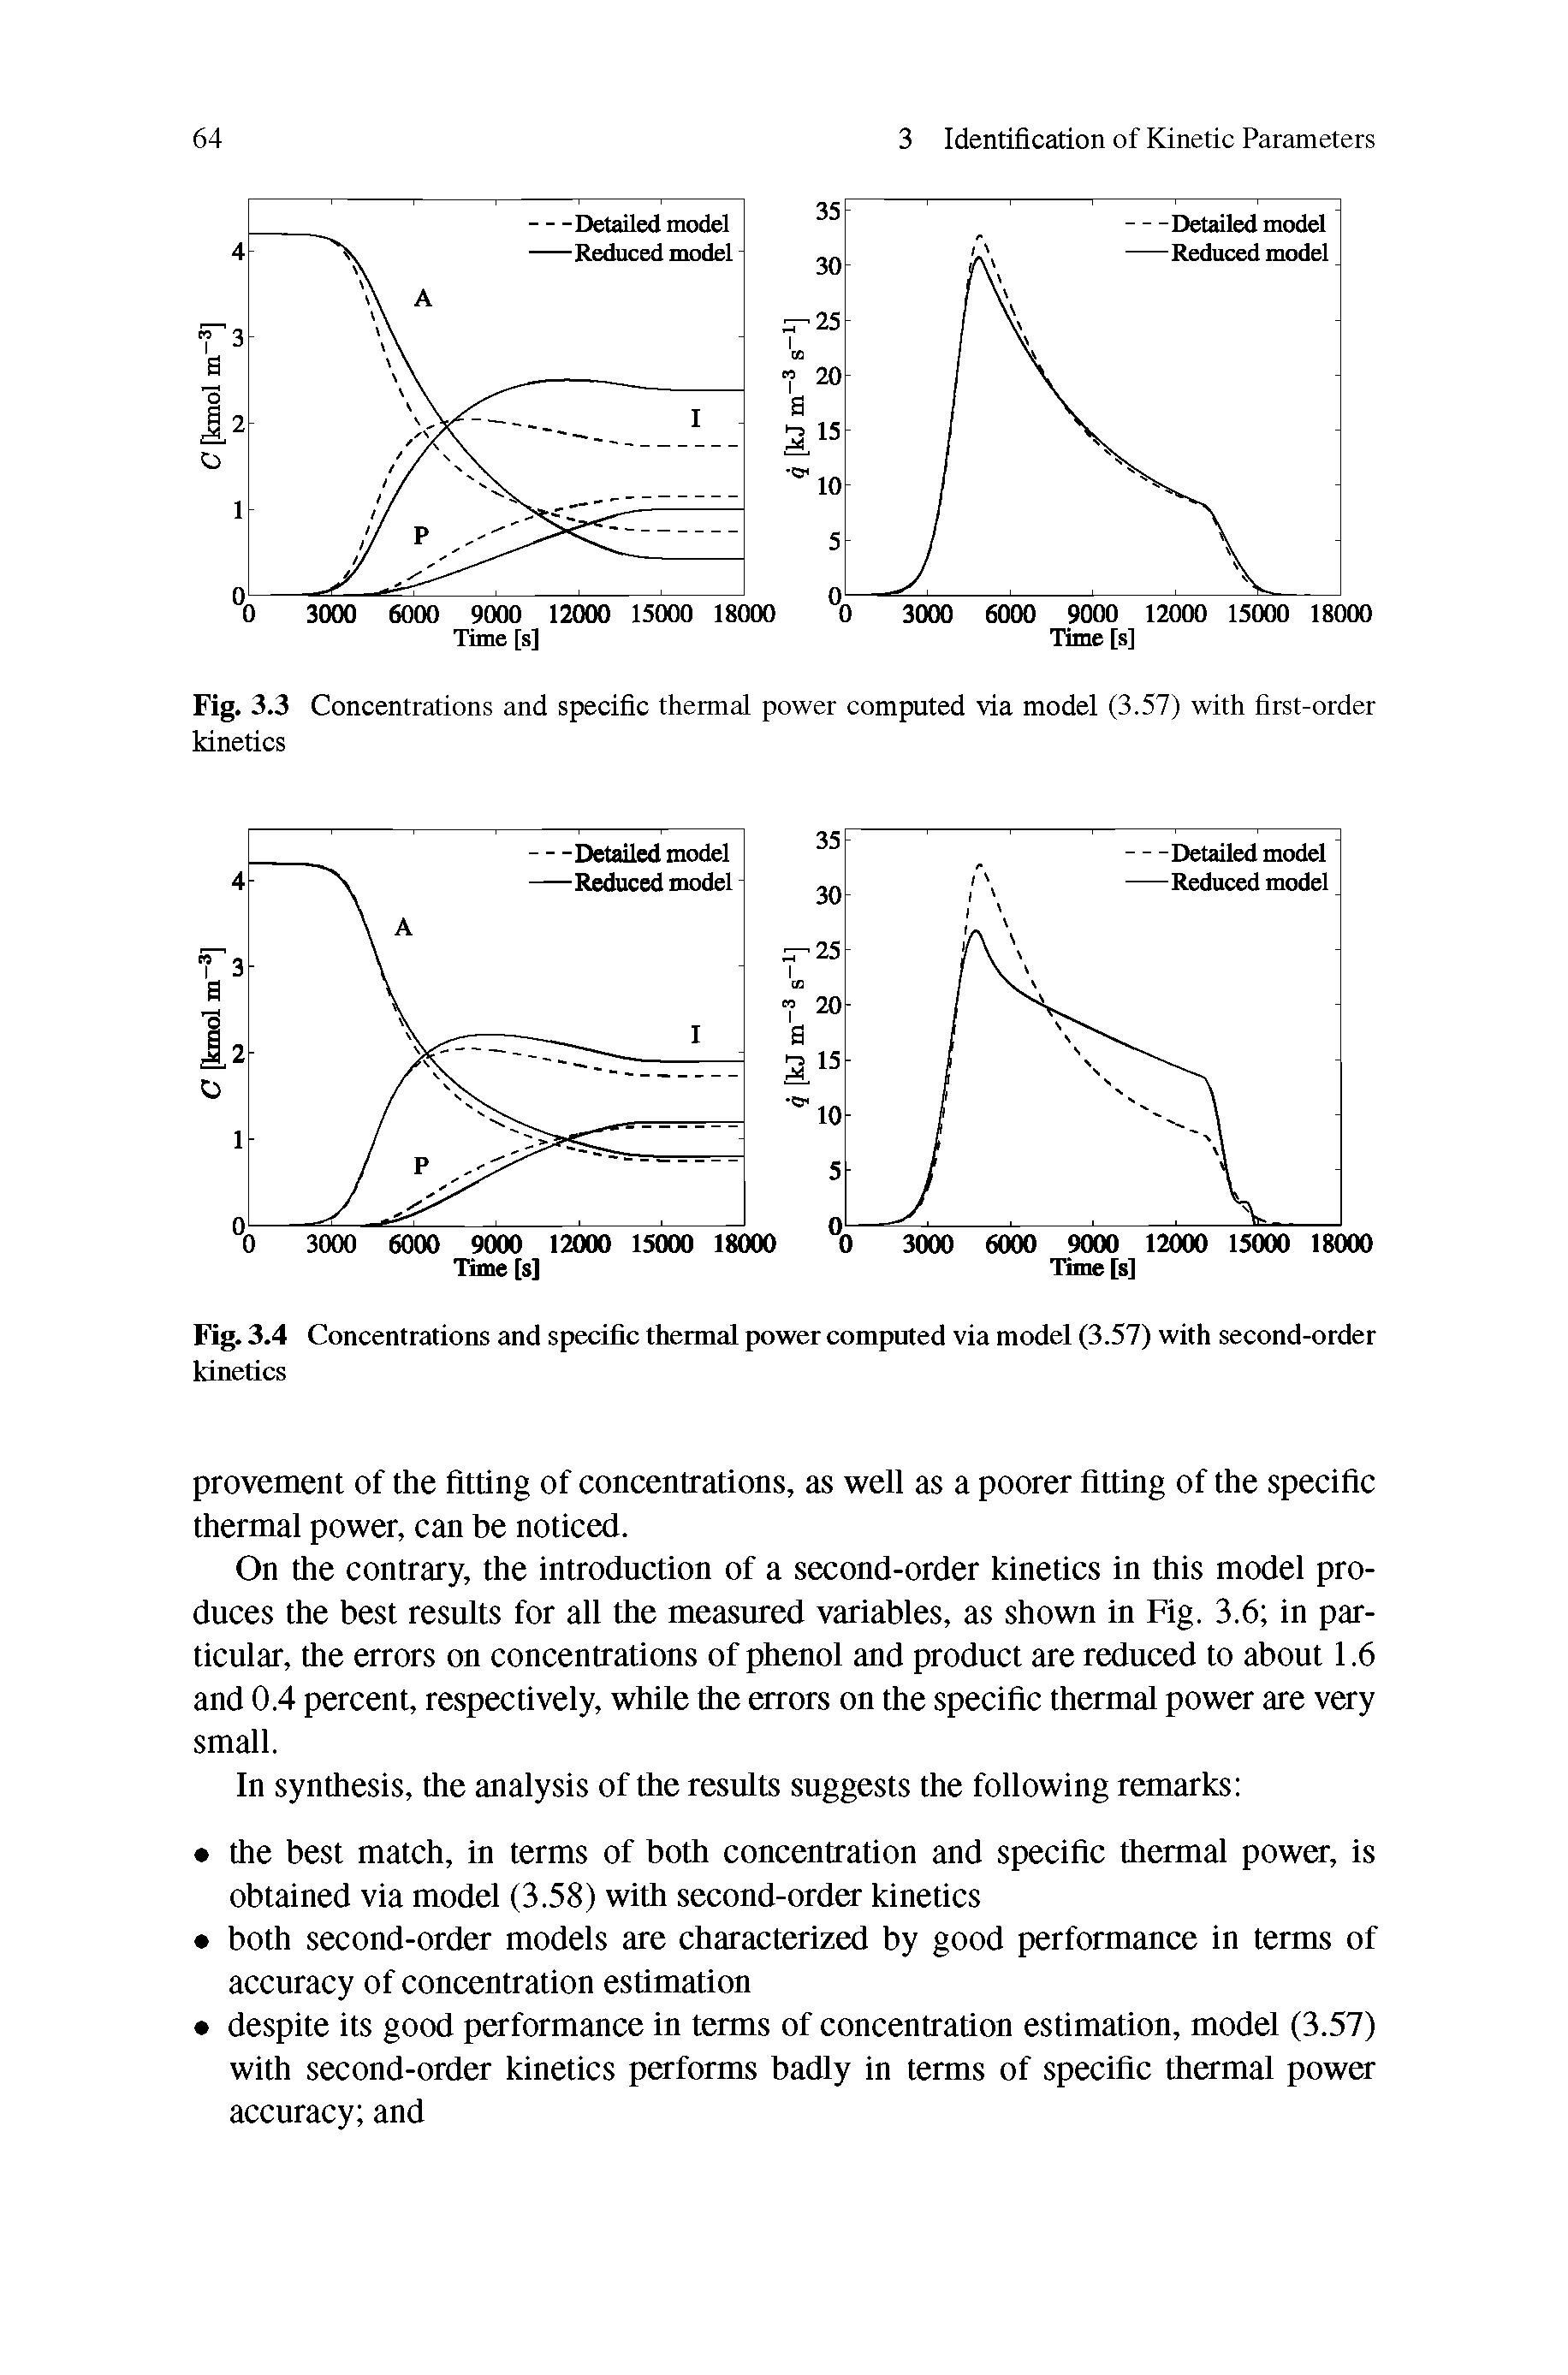 Fig. 3.3 Concentrations and specific thermal power computed via model (3.57) with first-order kinetics...